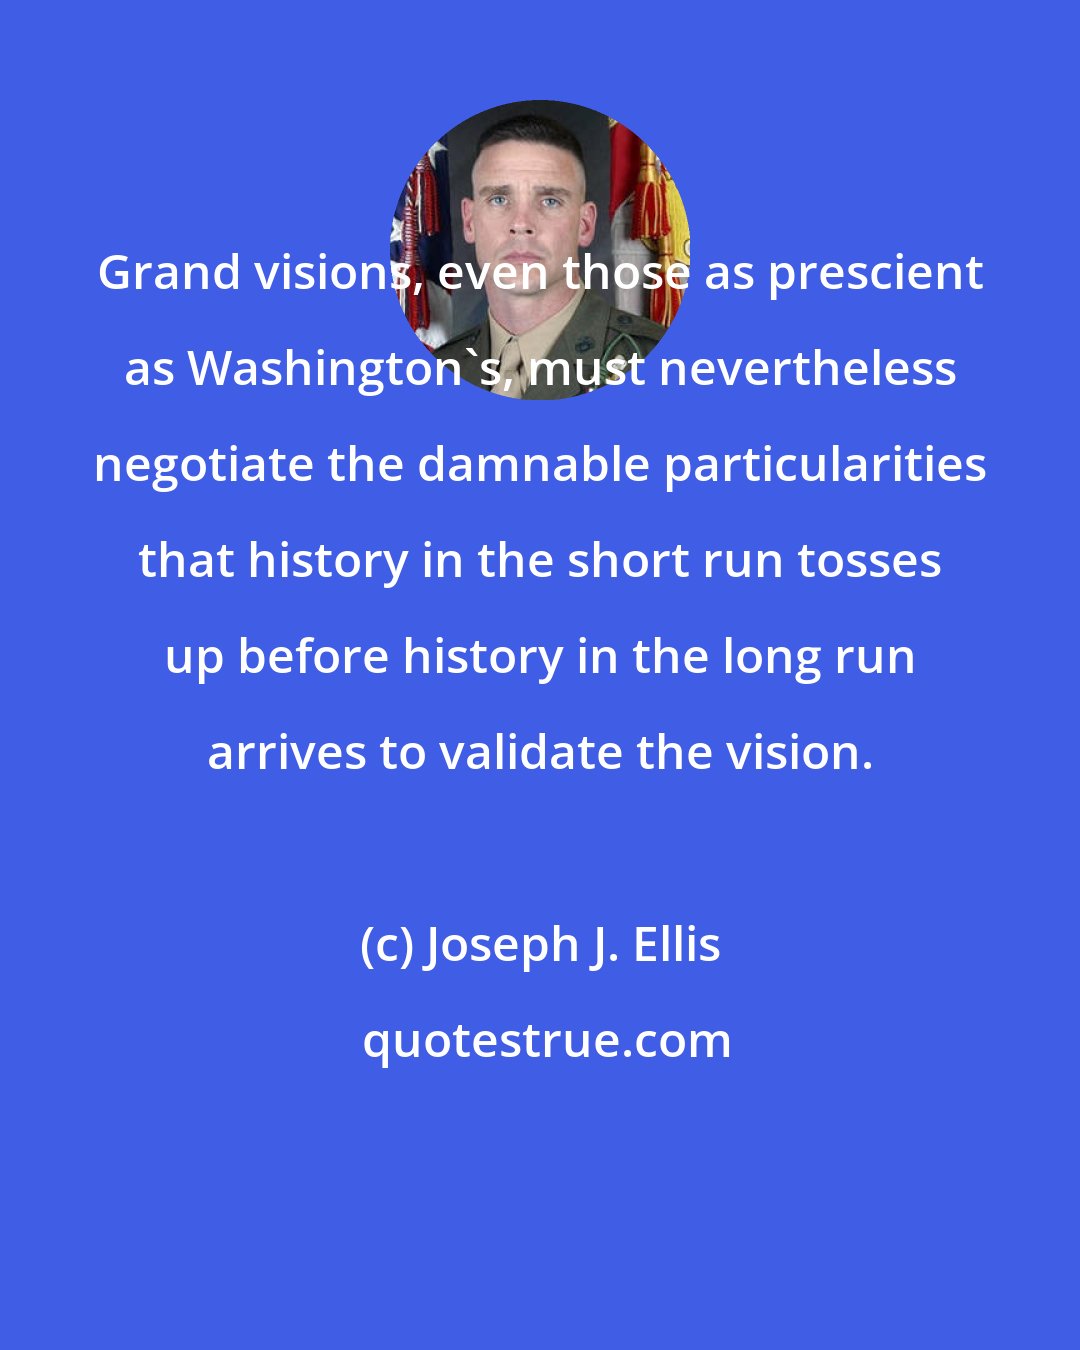 Joseph J. Ellis: Grand visions, even those as prescient as Washington's, must nevertheless negotiate the damnable particularities that history in the short run tosses up before history in the long run arrives to validate the vision.